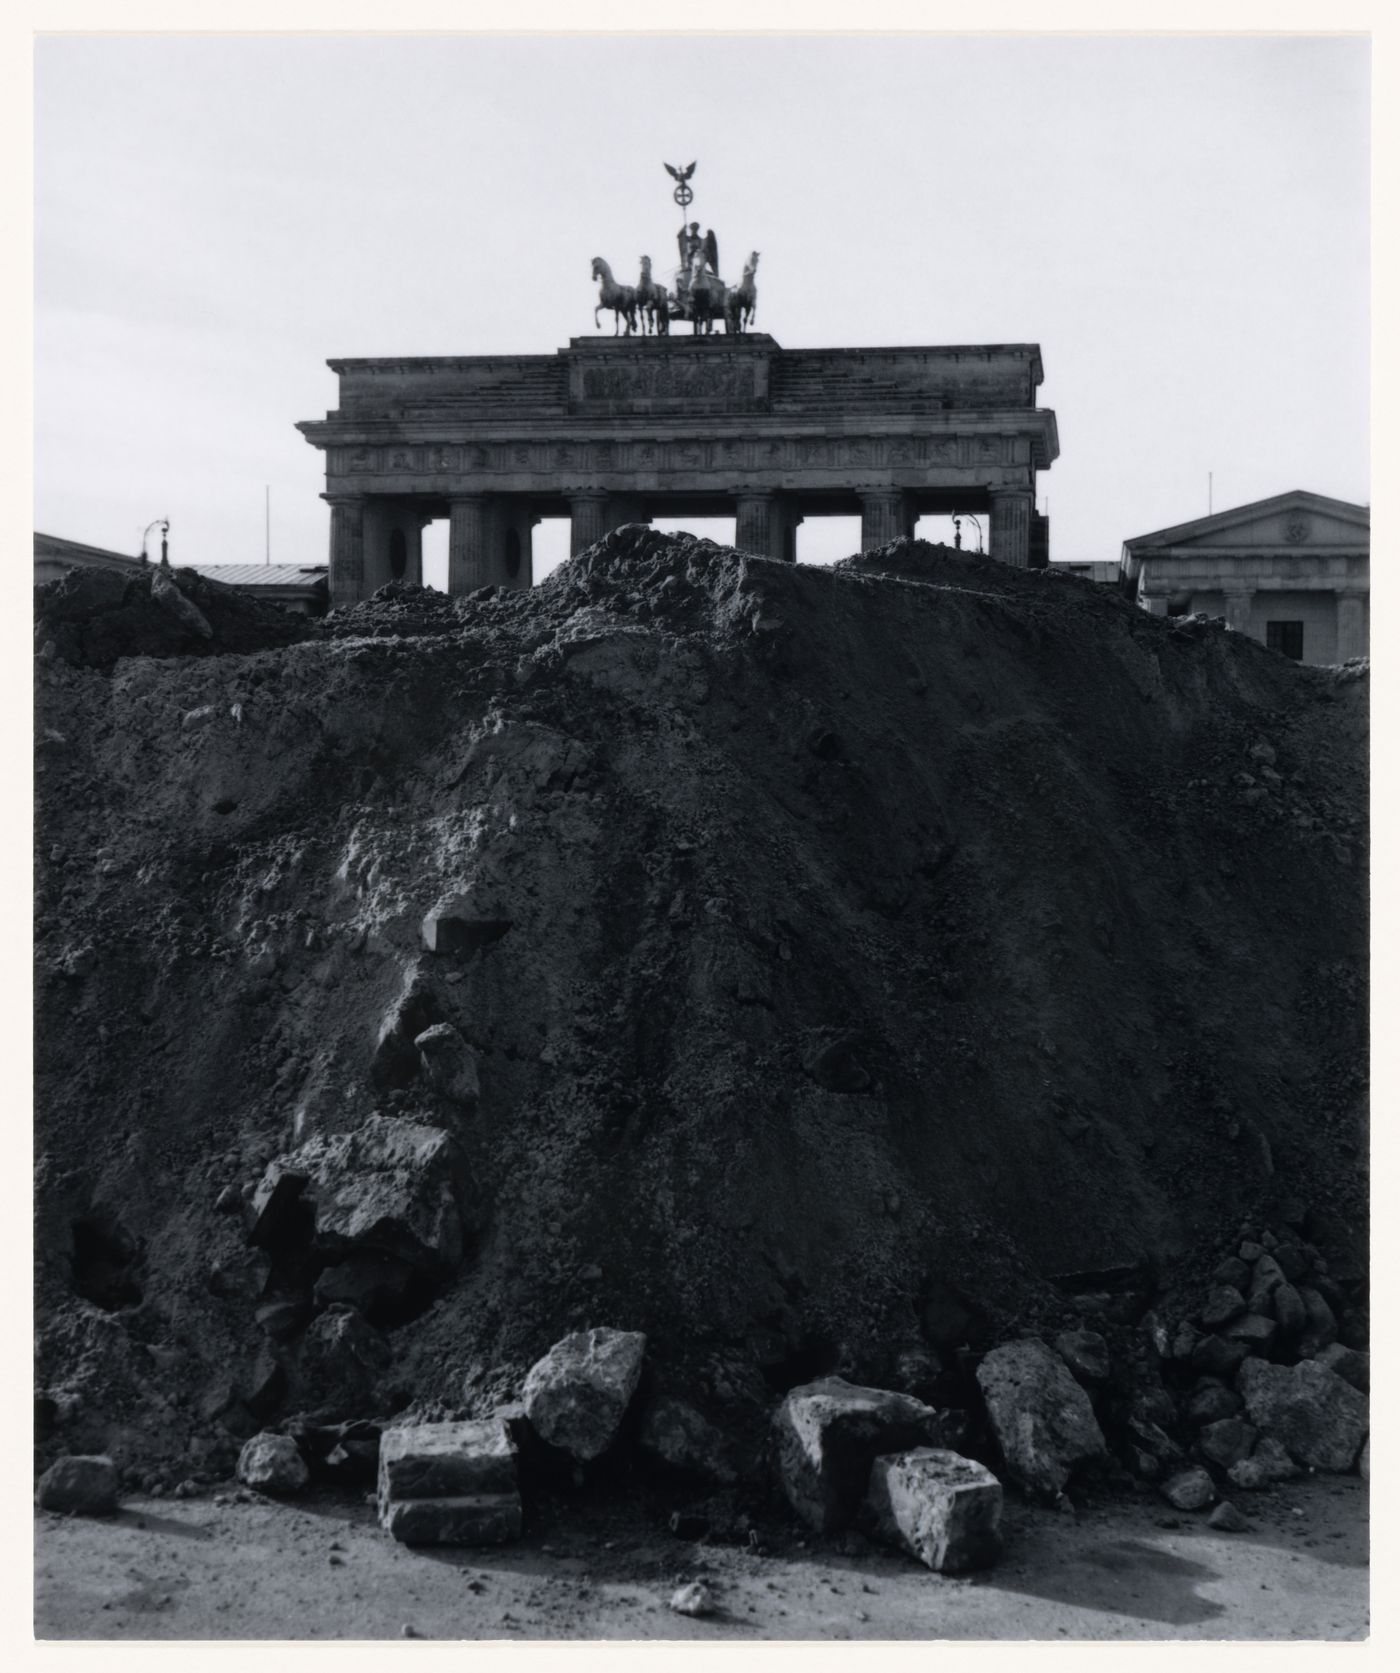 View of the Brandenburg Gate, Berlin, Germany, from the artist book "The Potsdamer Project"